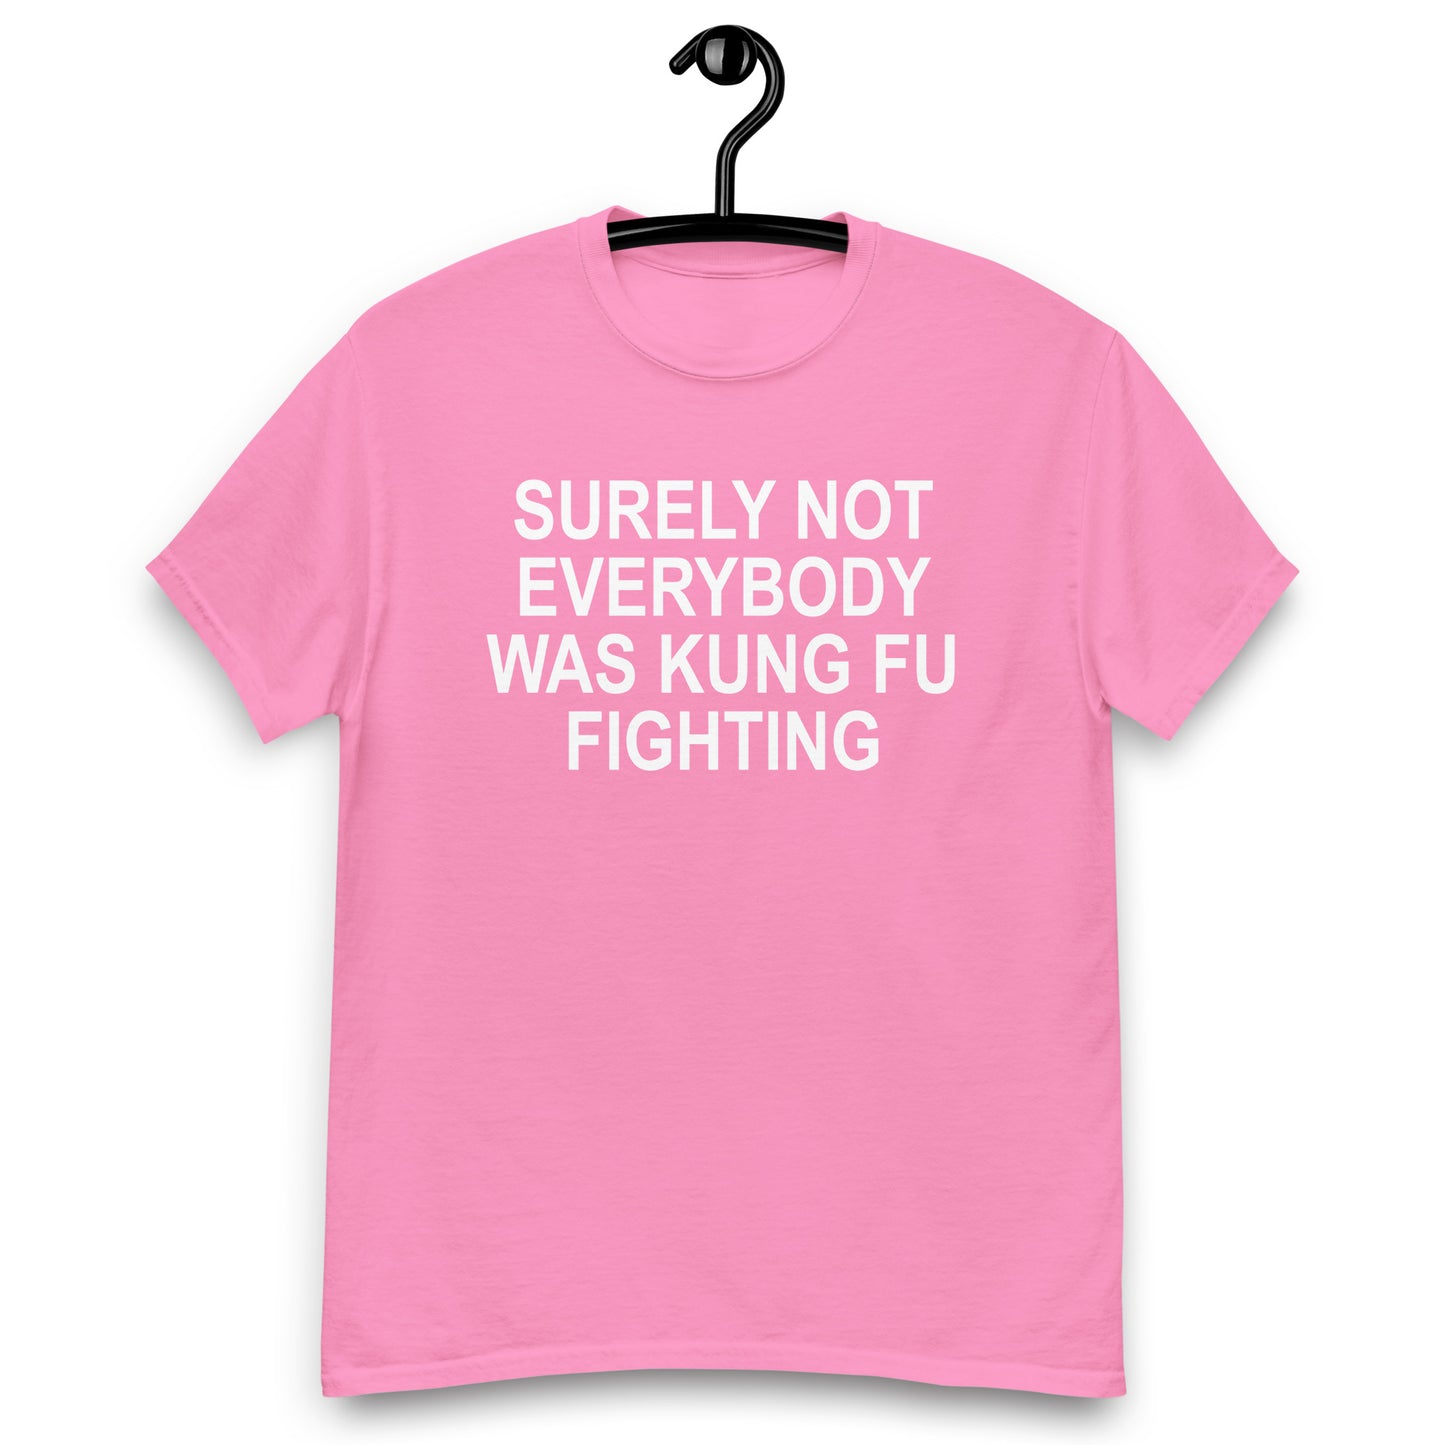 SURELY NOT EVERYBODY WAS KUNG FU FIGHTING tee